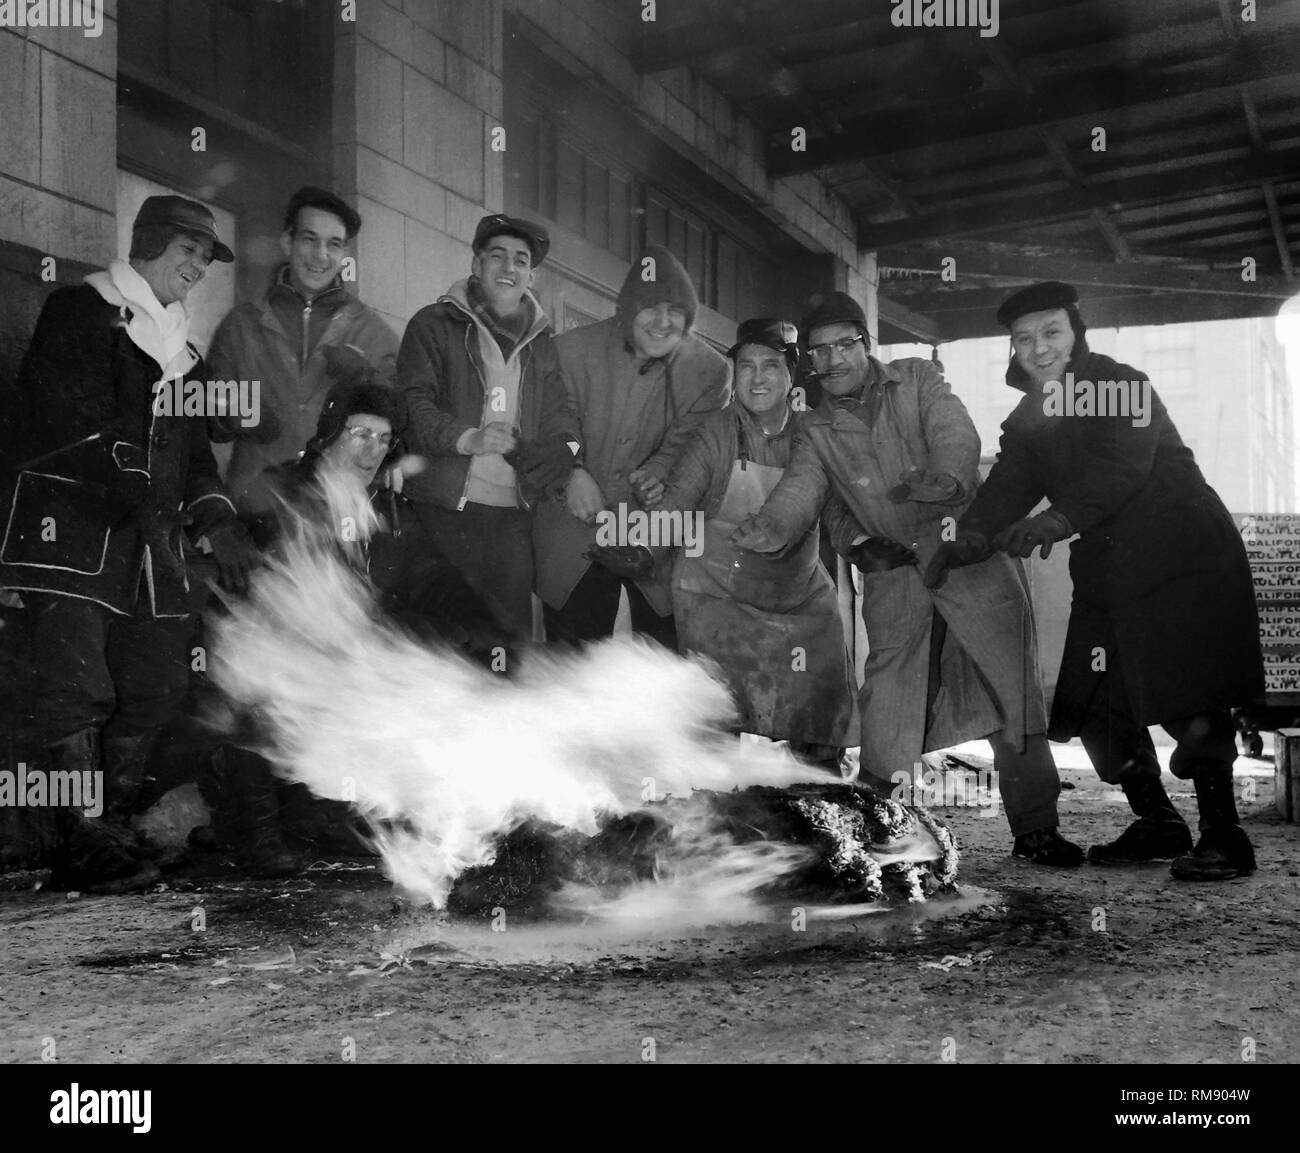 Loading dock workers keep warm with a fire during a cold winter day on Lower Wacker Drive in Chicago, ca.1953. Stock Photo